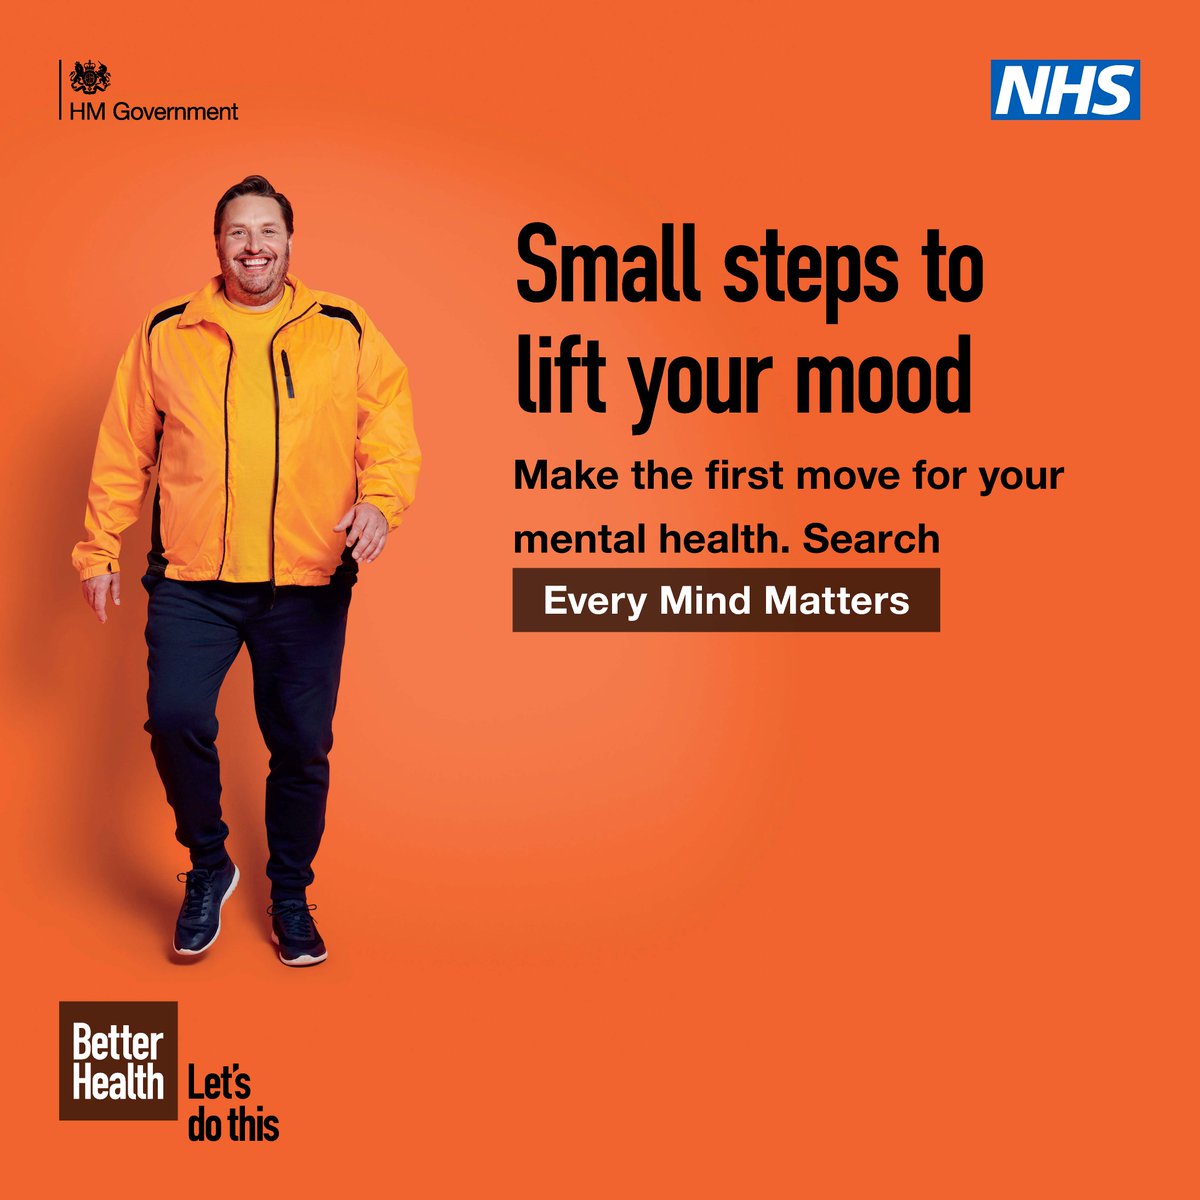 Walk away your worries! A daily brisk walk can boost your energy, lift your mood, clear your mind and stop your worries going into overdrive. Find your little big thing here 👉 nhs.uk/every-mind-mat… #MentalHealthAwarenessWeek #EveryMindMatters